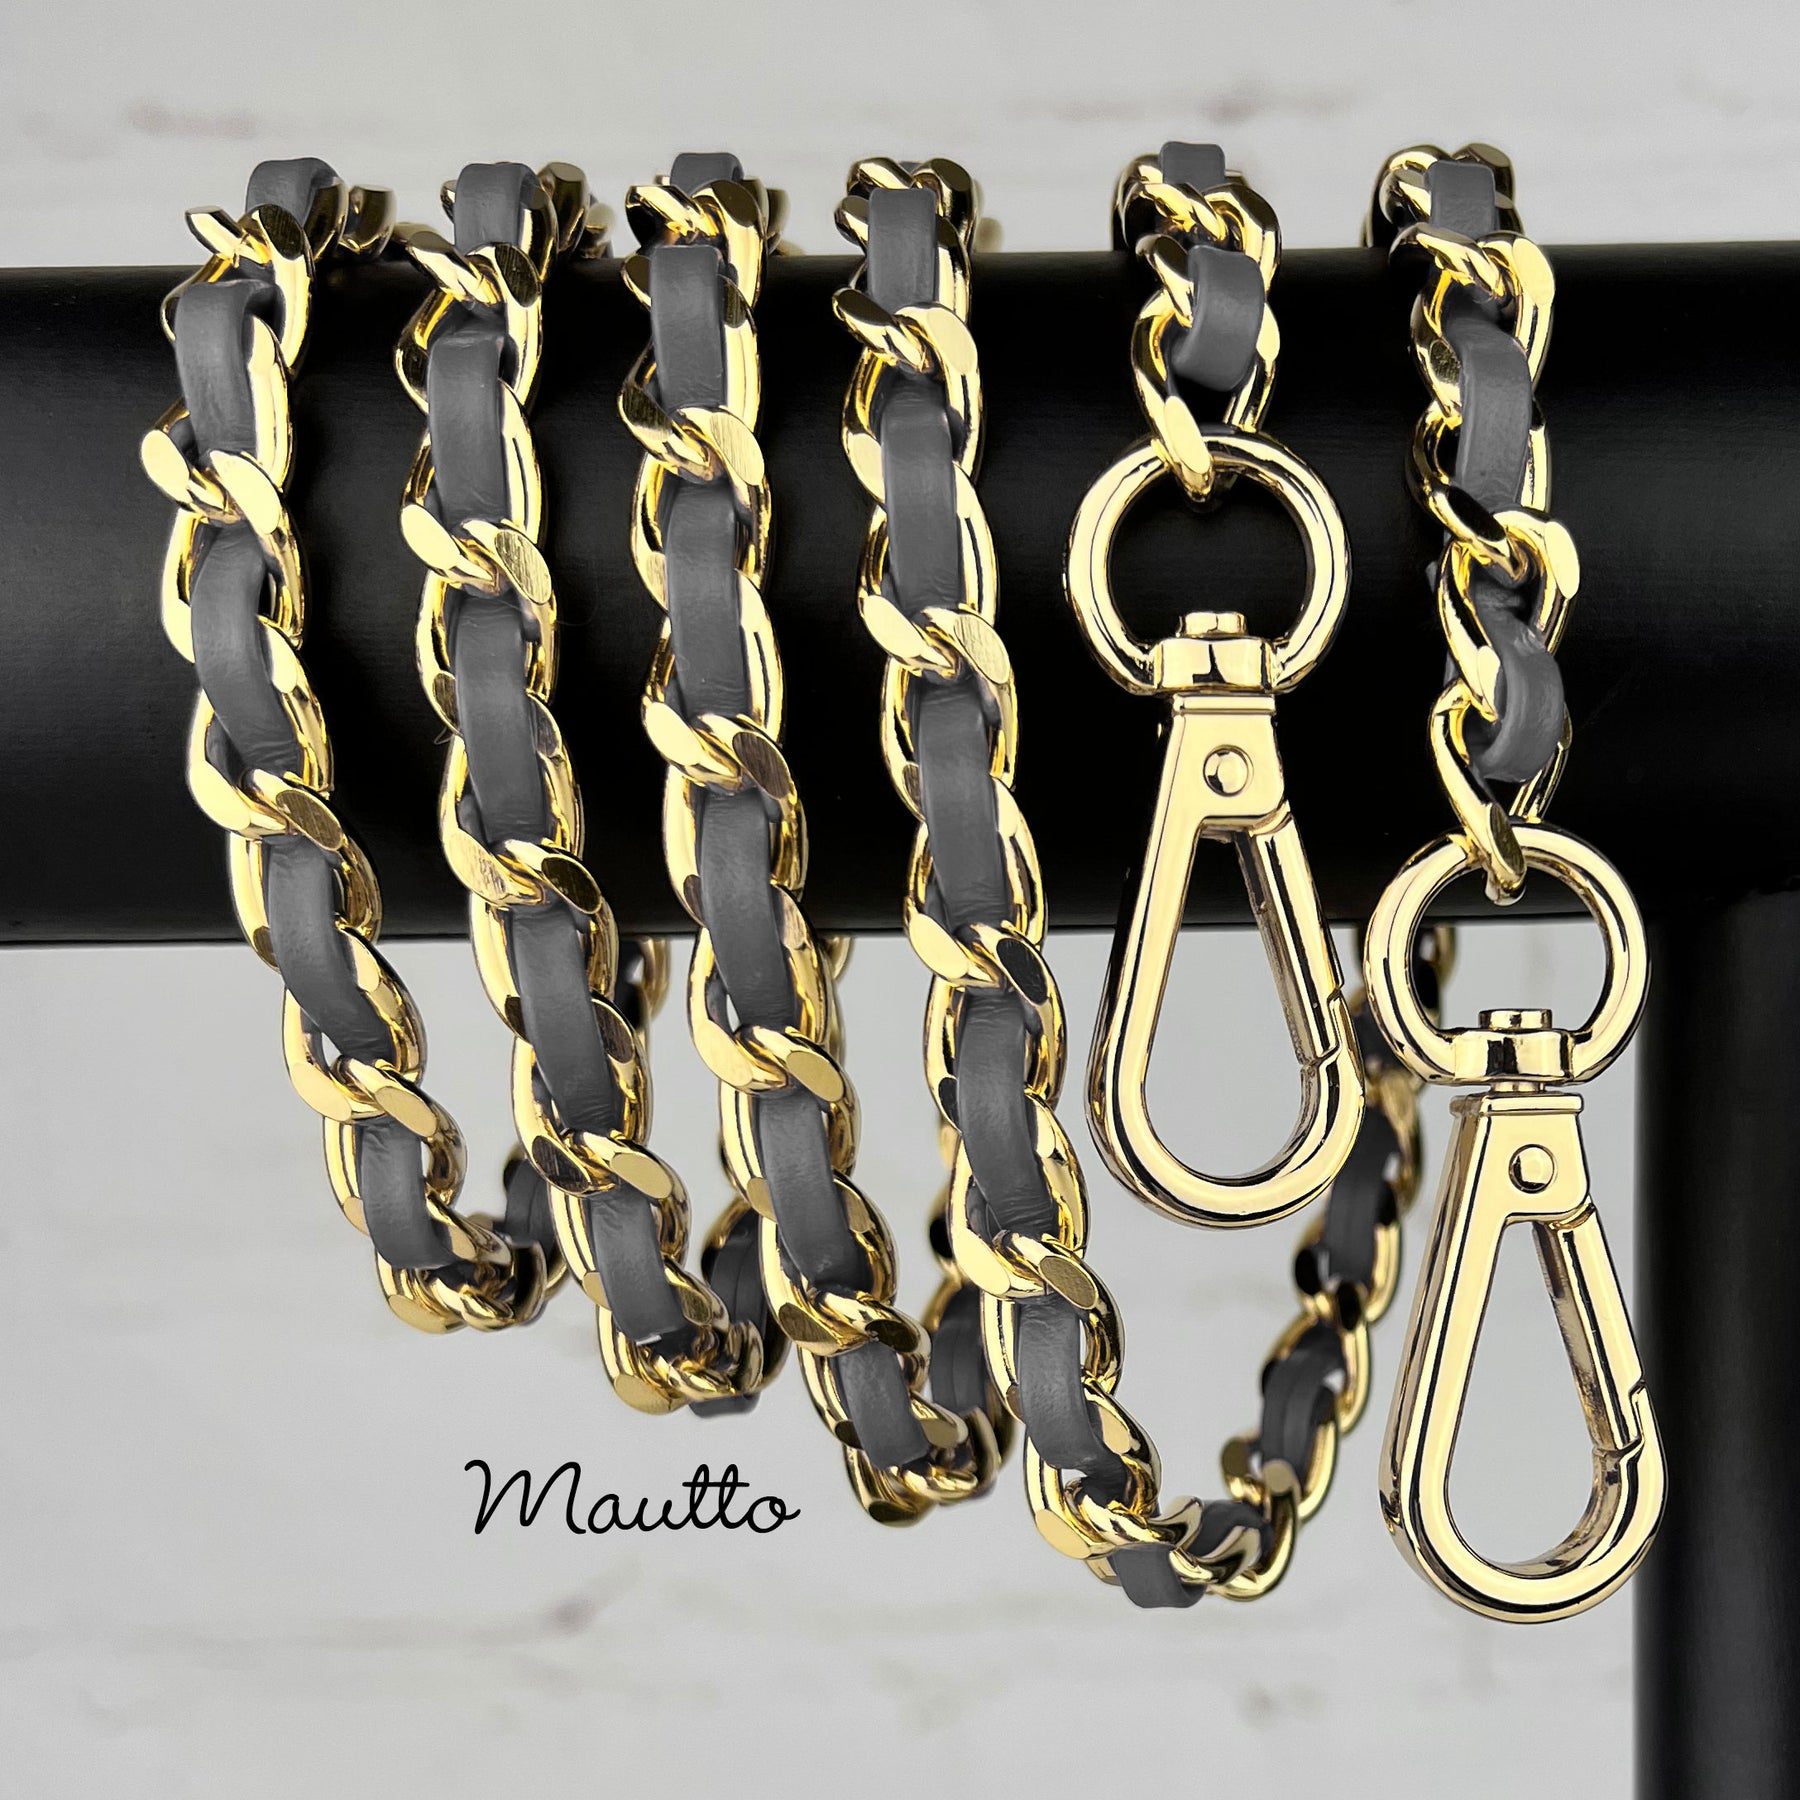 Mautto Rolo Link Chain Strap - Light Gold Luxury Strap for Purses & Handbags 50 Crossbody / none; Chain Only